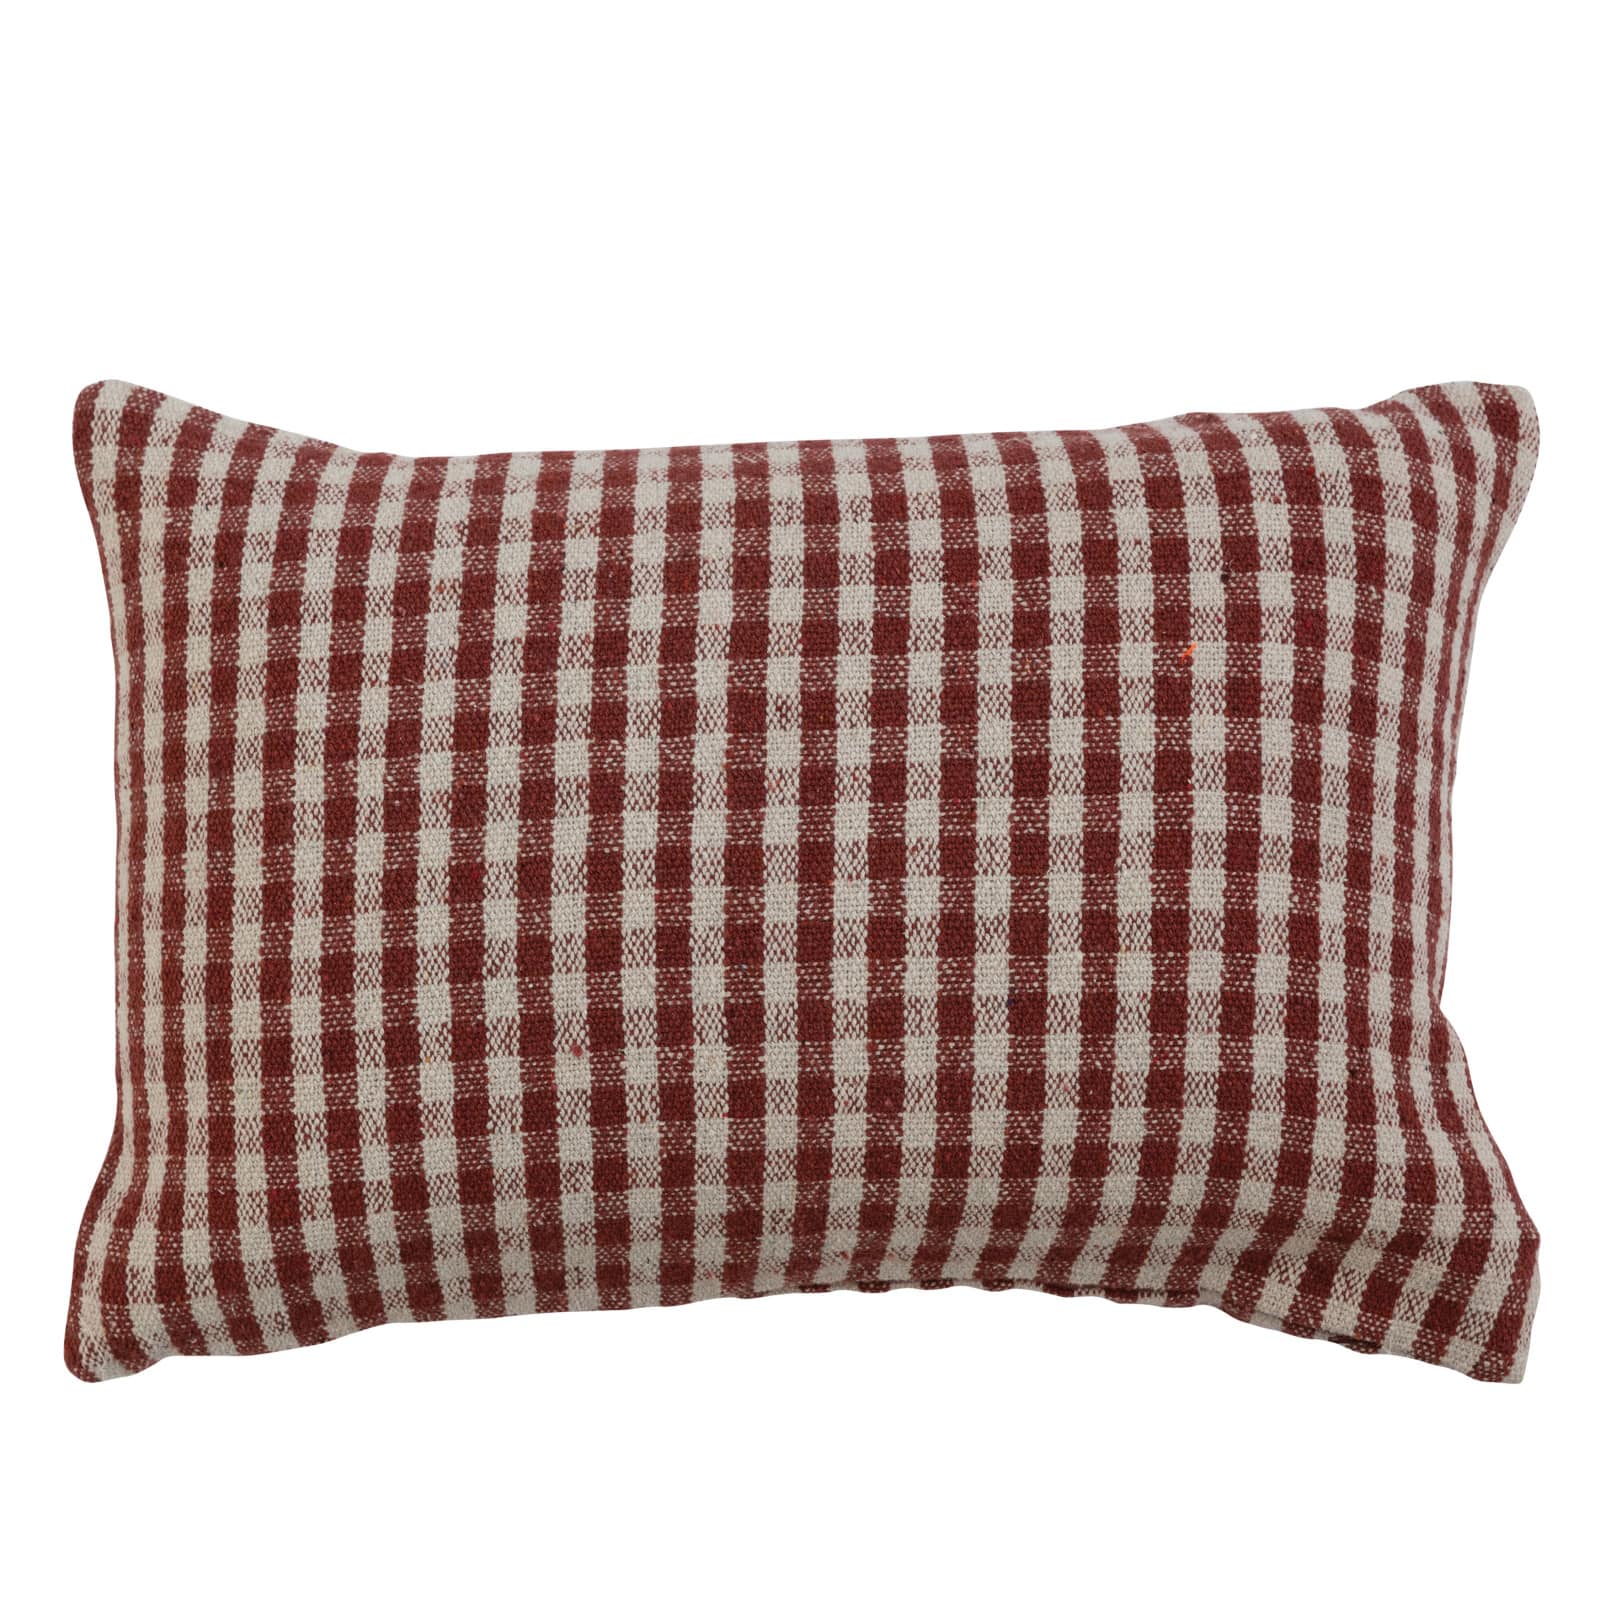 Gingham Woven Recycled Cotton Blend Lumbar Pillow Cover